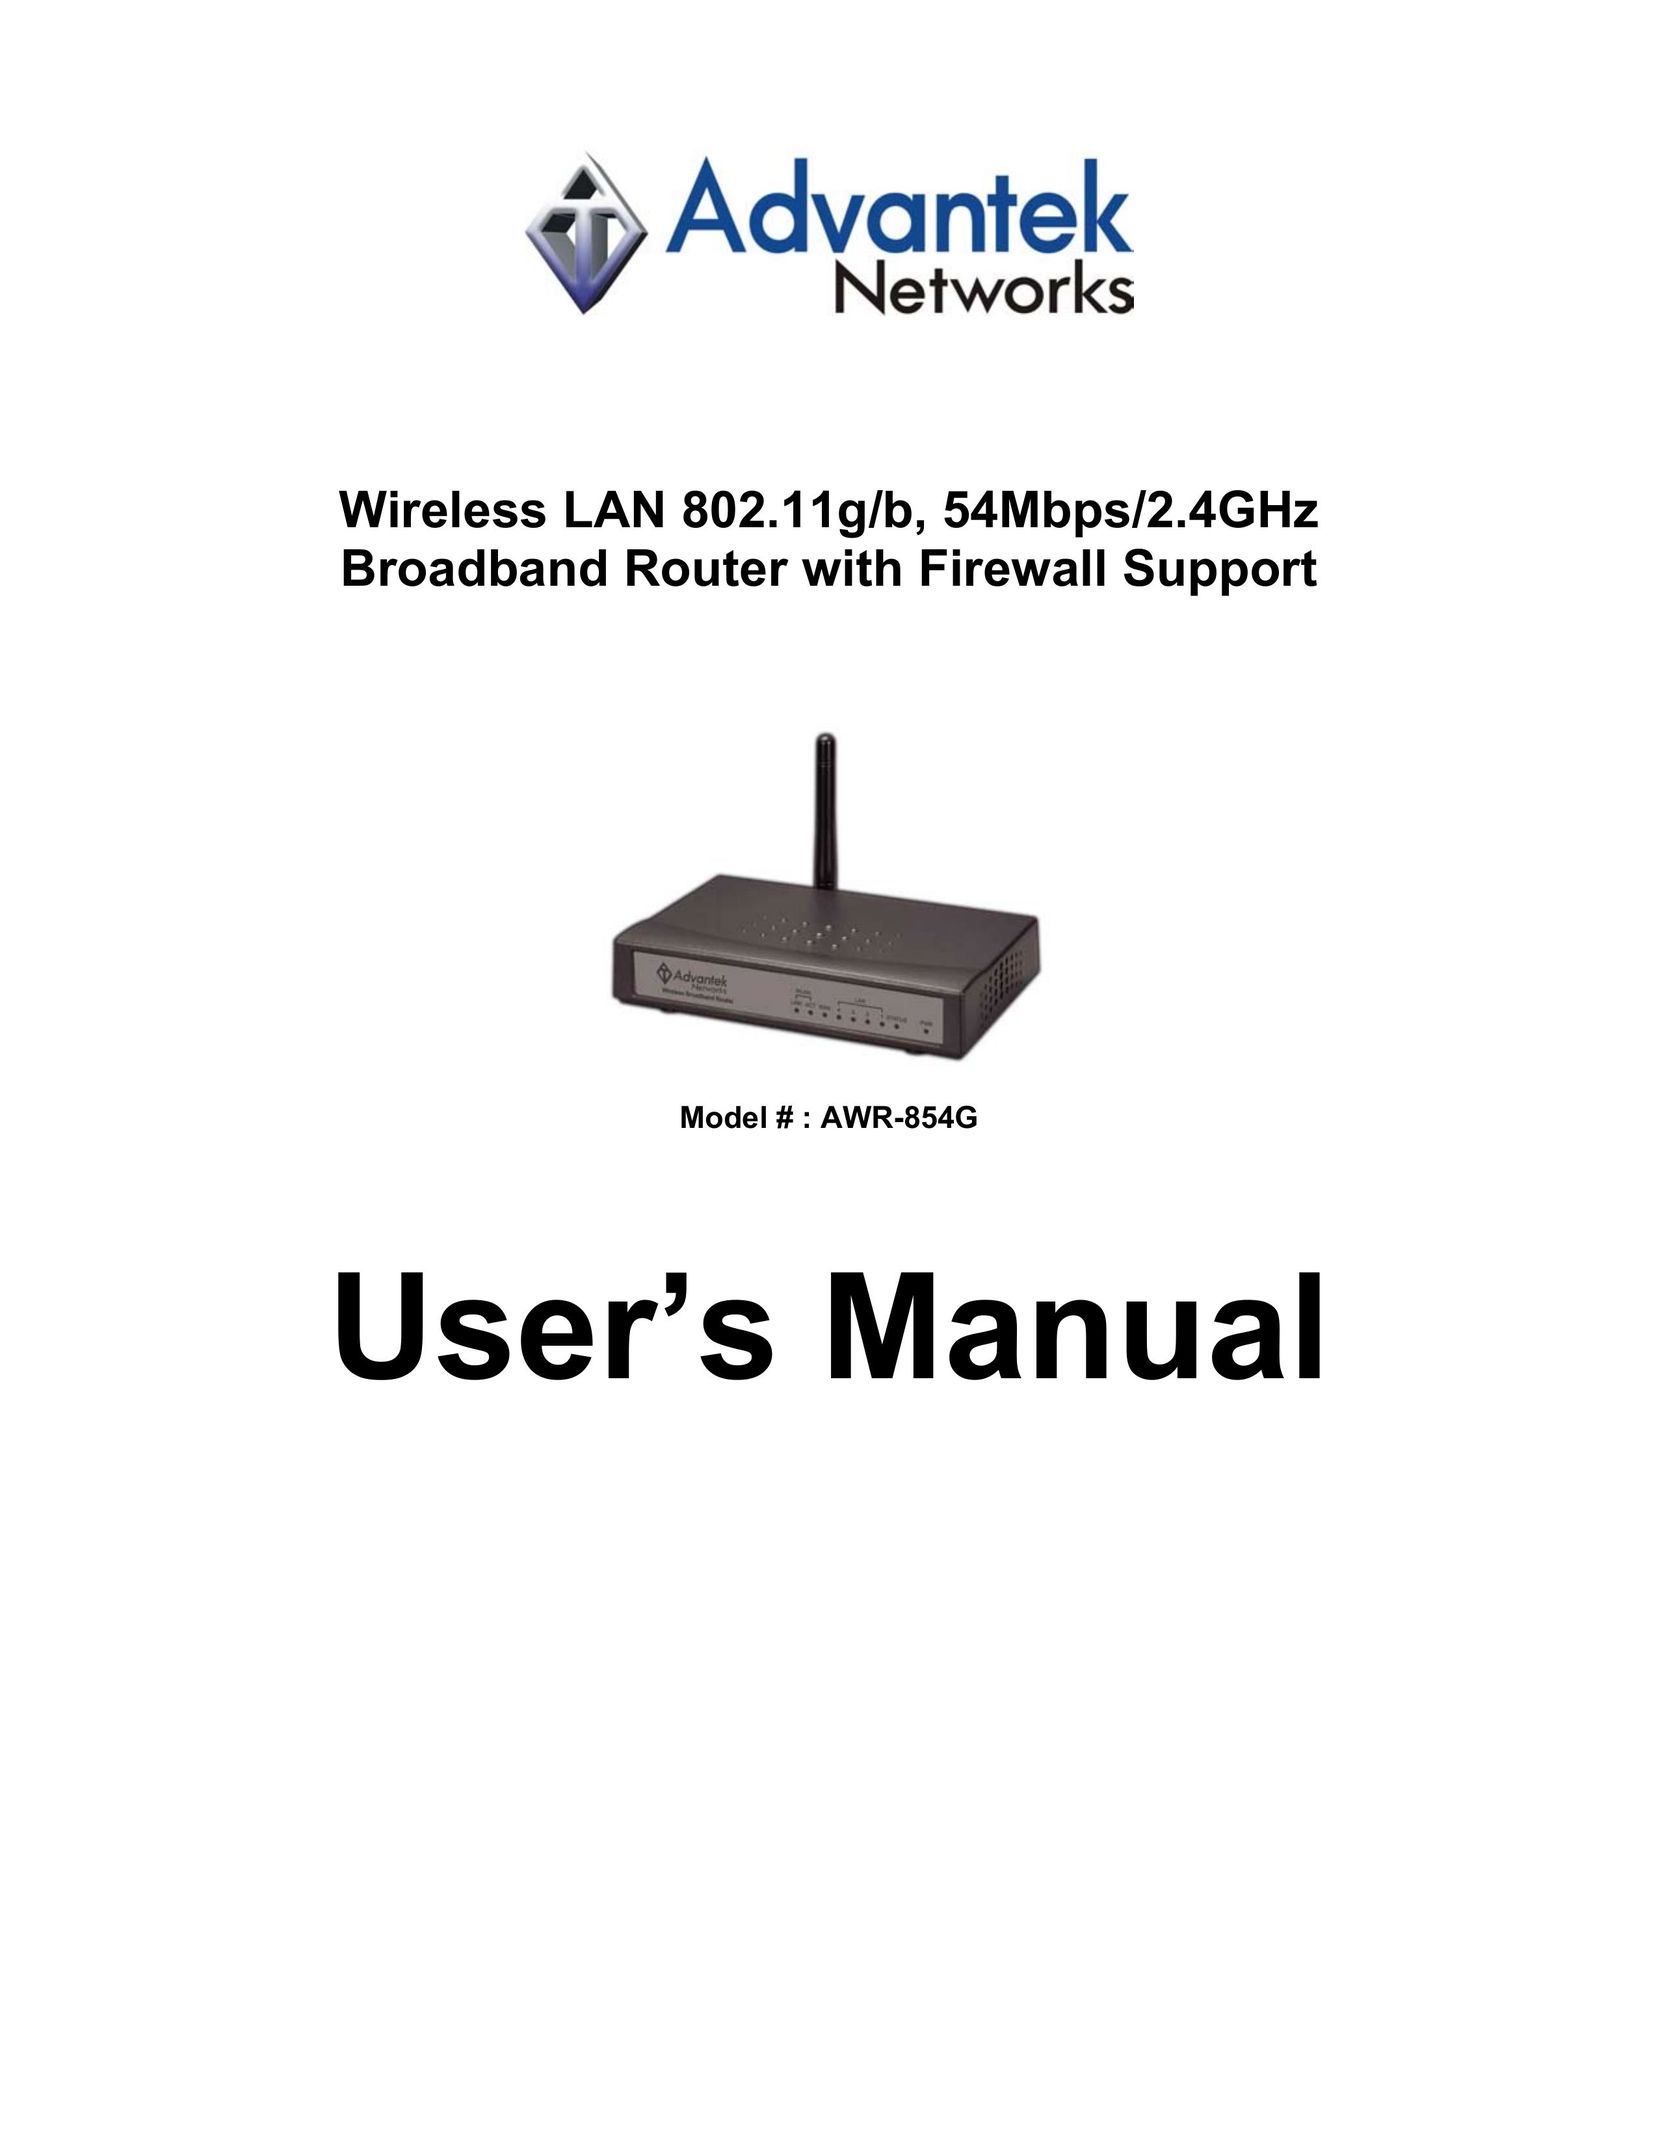 Advantek Networks Wireless LAN 802.11g/b, 54Mbps/2.4GHz Broadband Router with Firewall Support Network Router User Manual